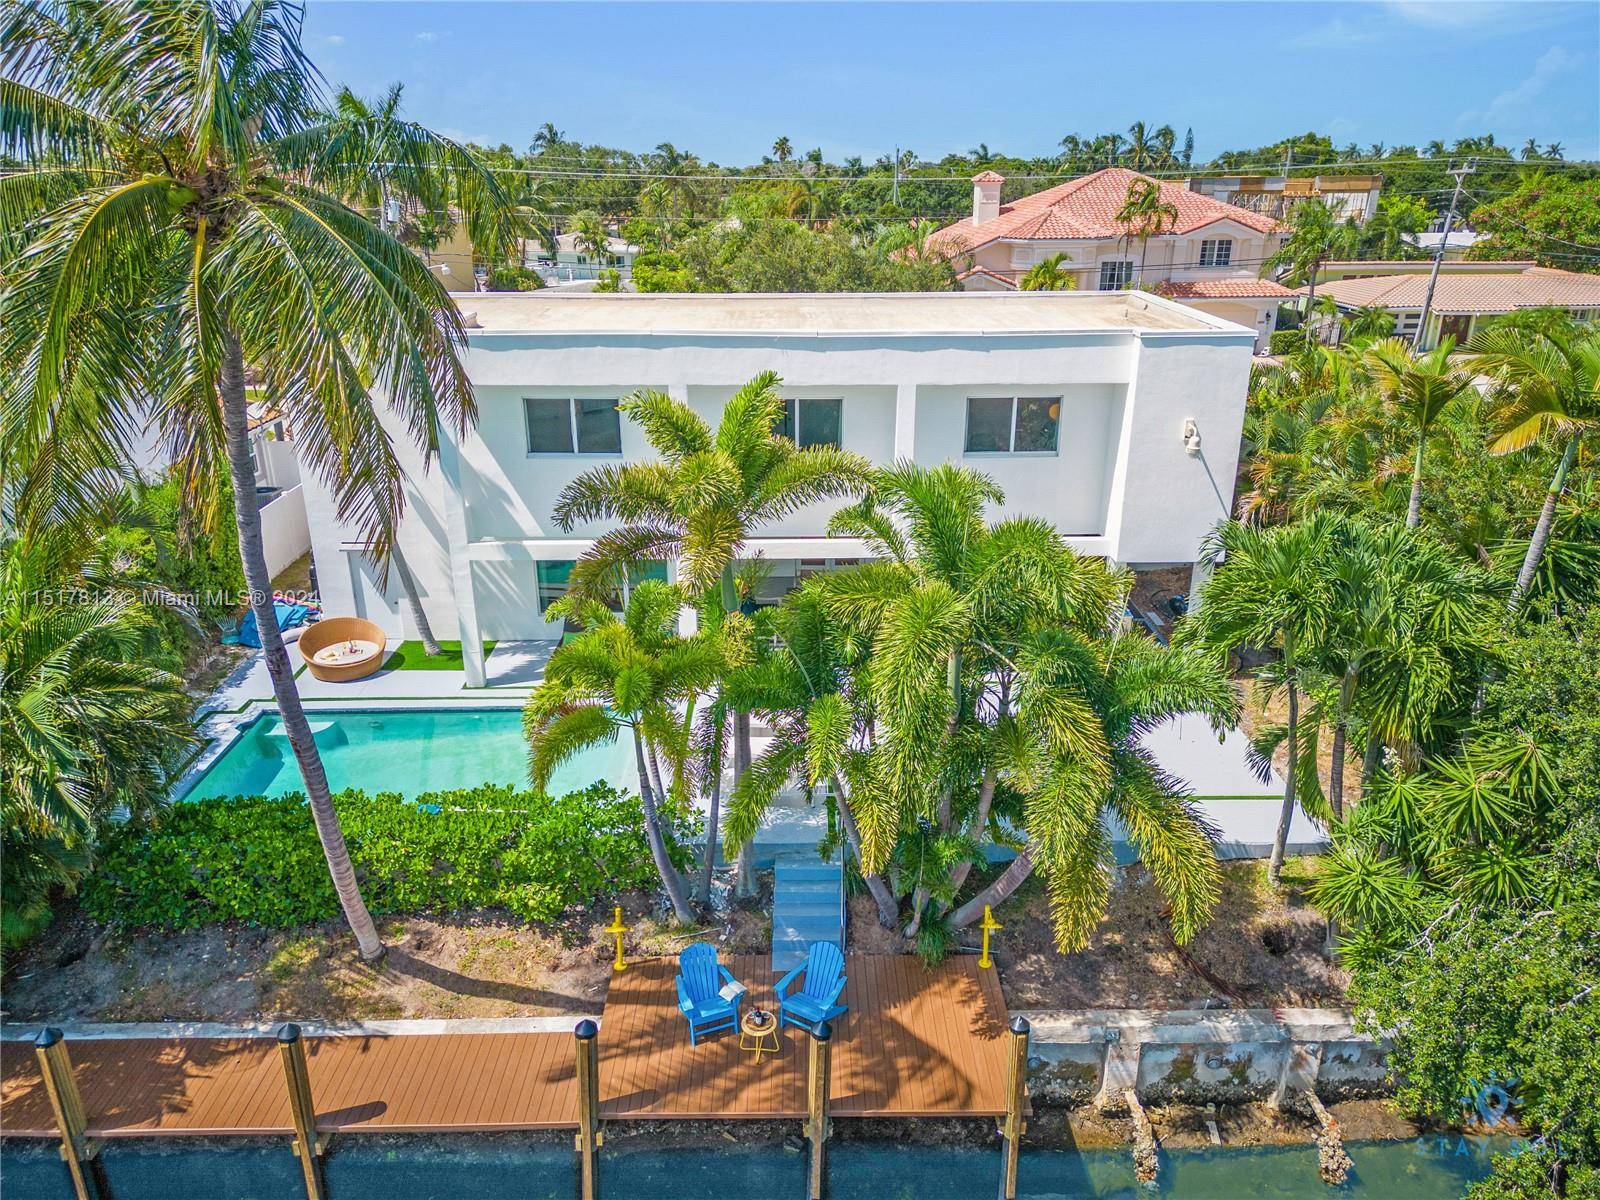 This stunning moderno house in Lighthouse Point with PRIVATE DOCK boasts 5 bedrooms and 4 bathrooms, offering ample space for a family or groups.